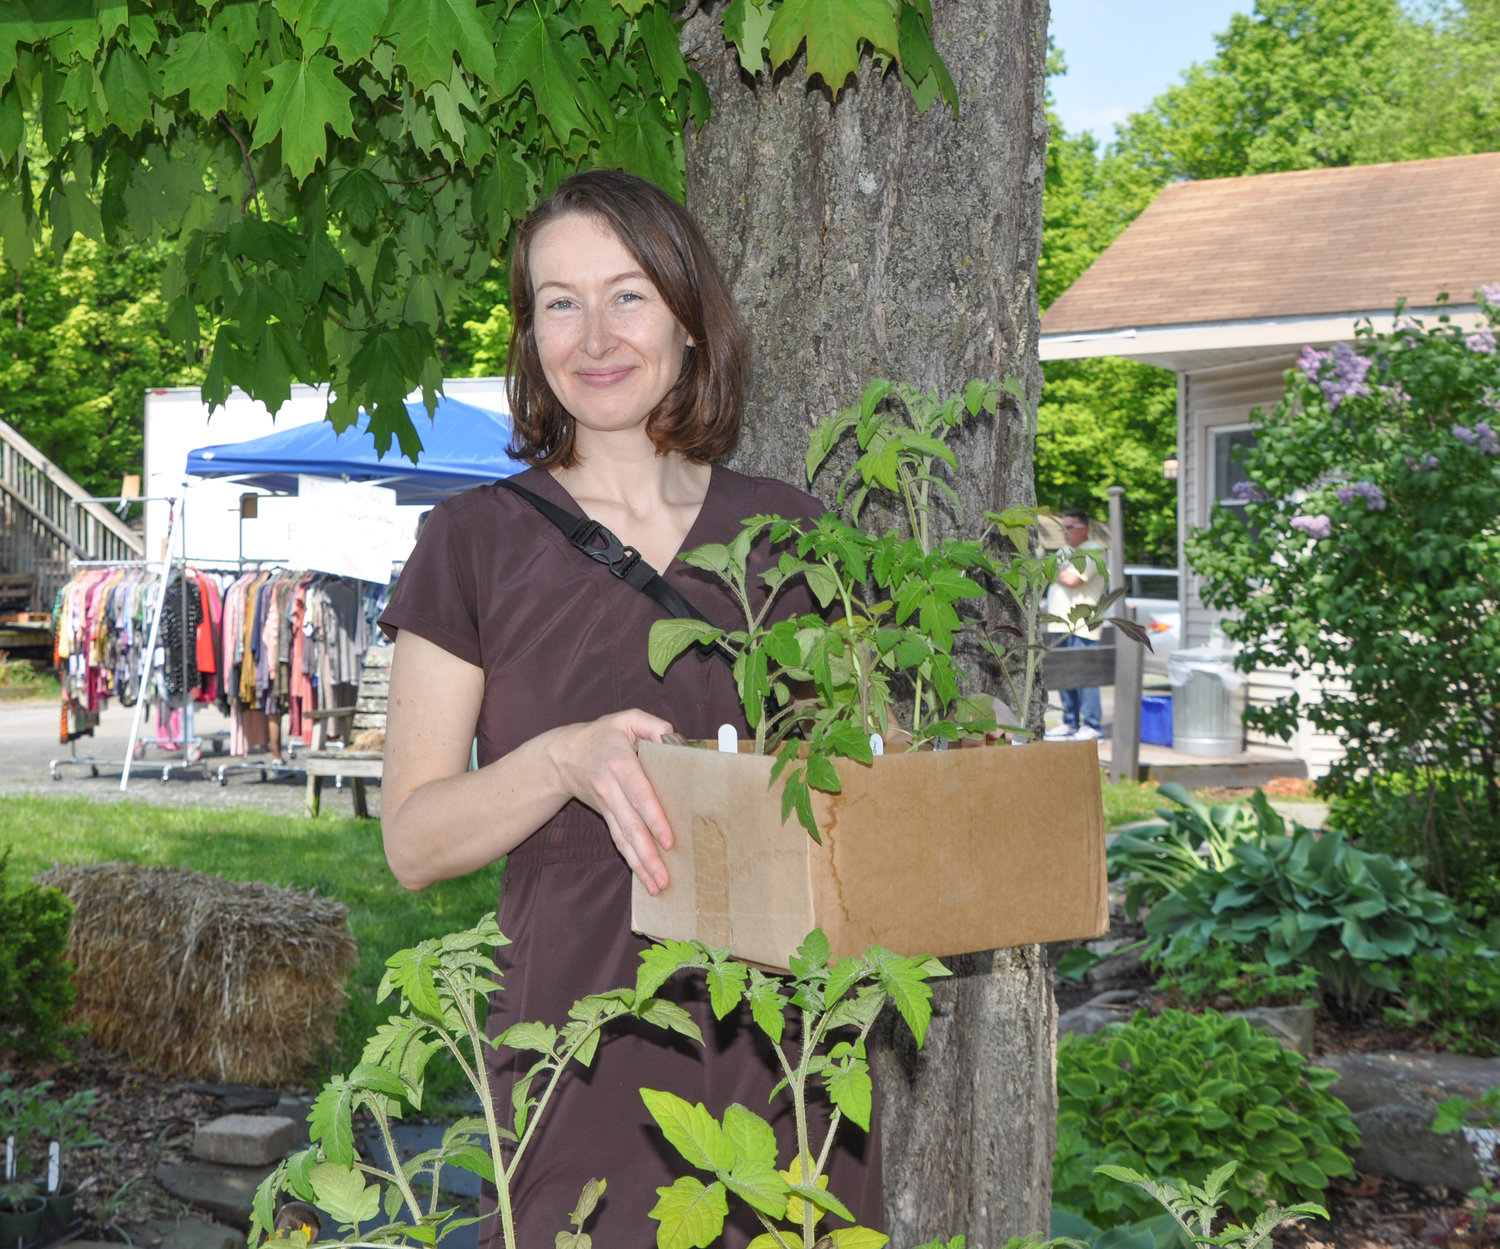 Livingston Manor resident Ashley Tully was happy to attend Flower Day, support Livingston Manor Renaissance and stock up on plants for her garden.